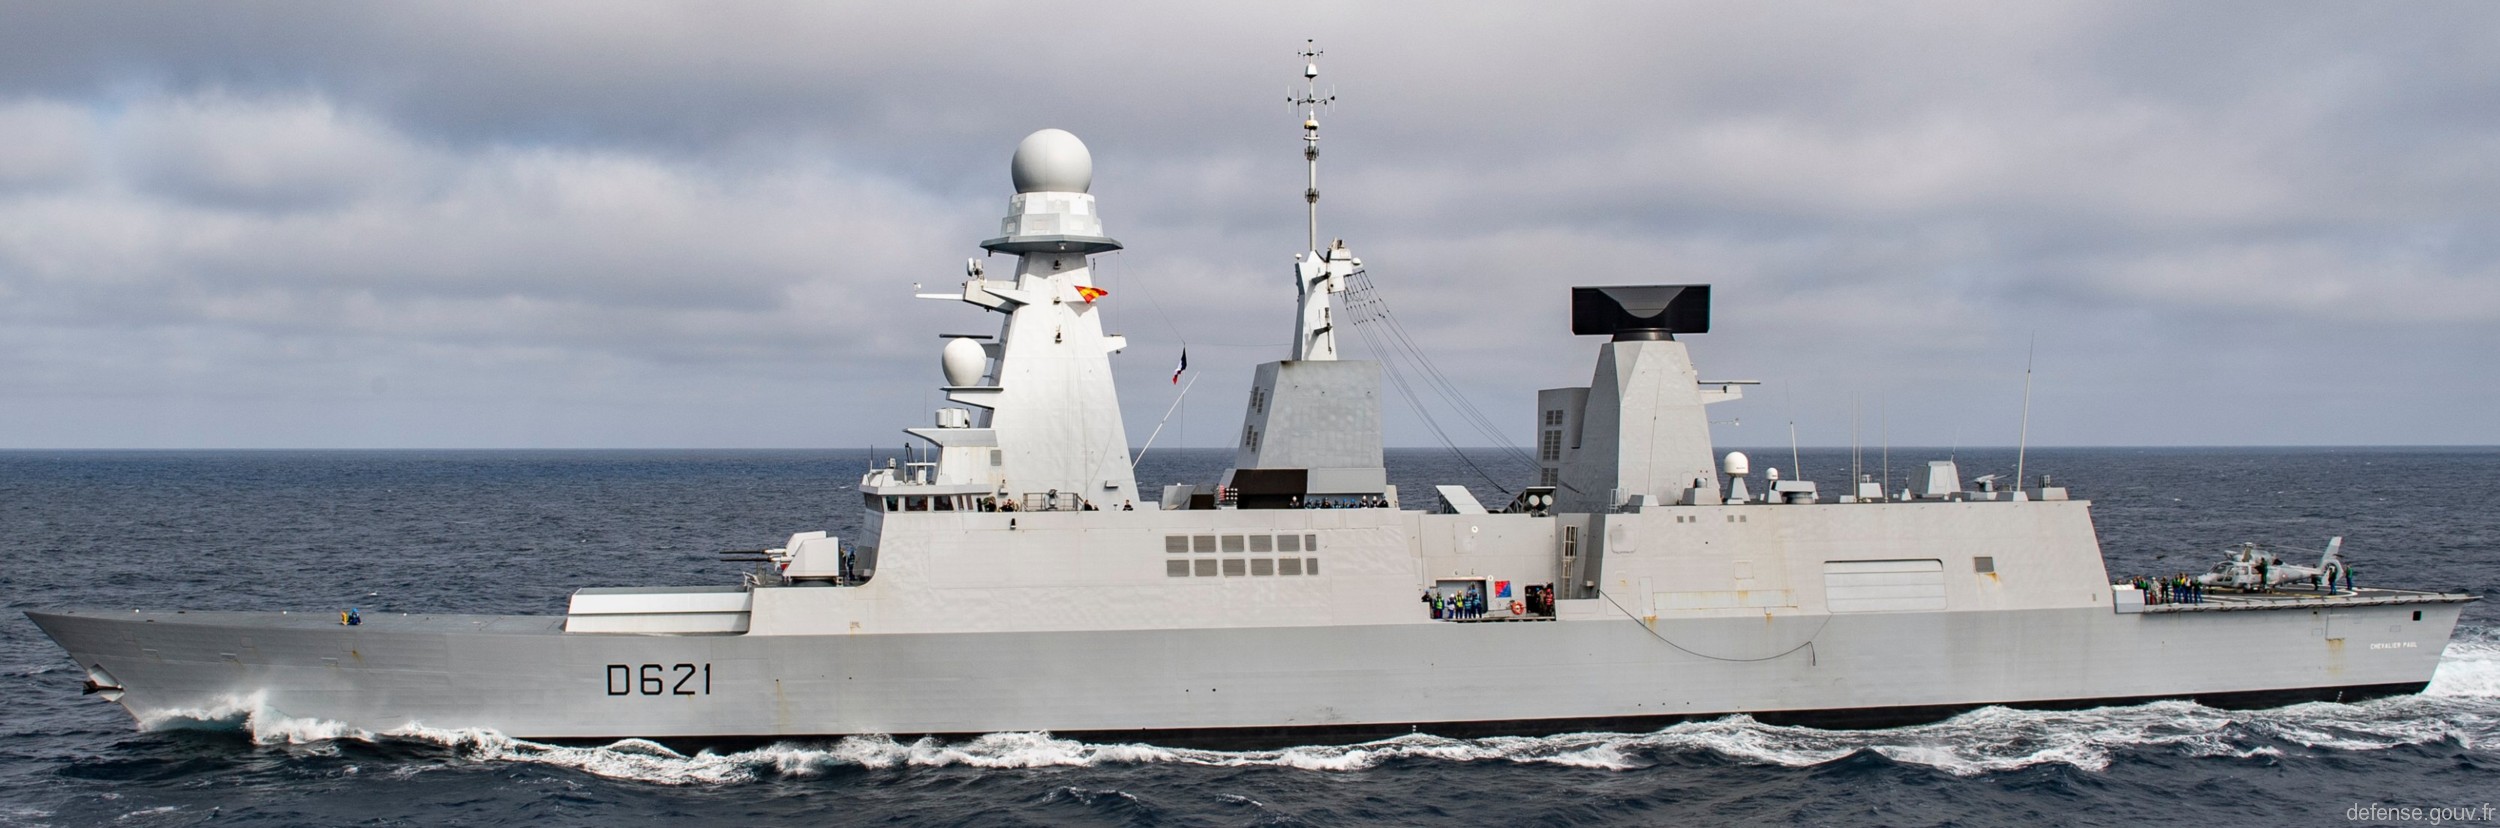 d-621 fs chevalier paul forbin horizon class guided missile frigate anti-air-warfare aaw ffgh french navy marine nationale 26